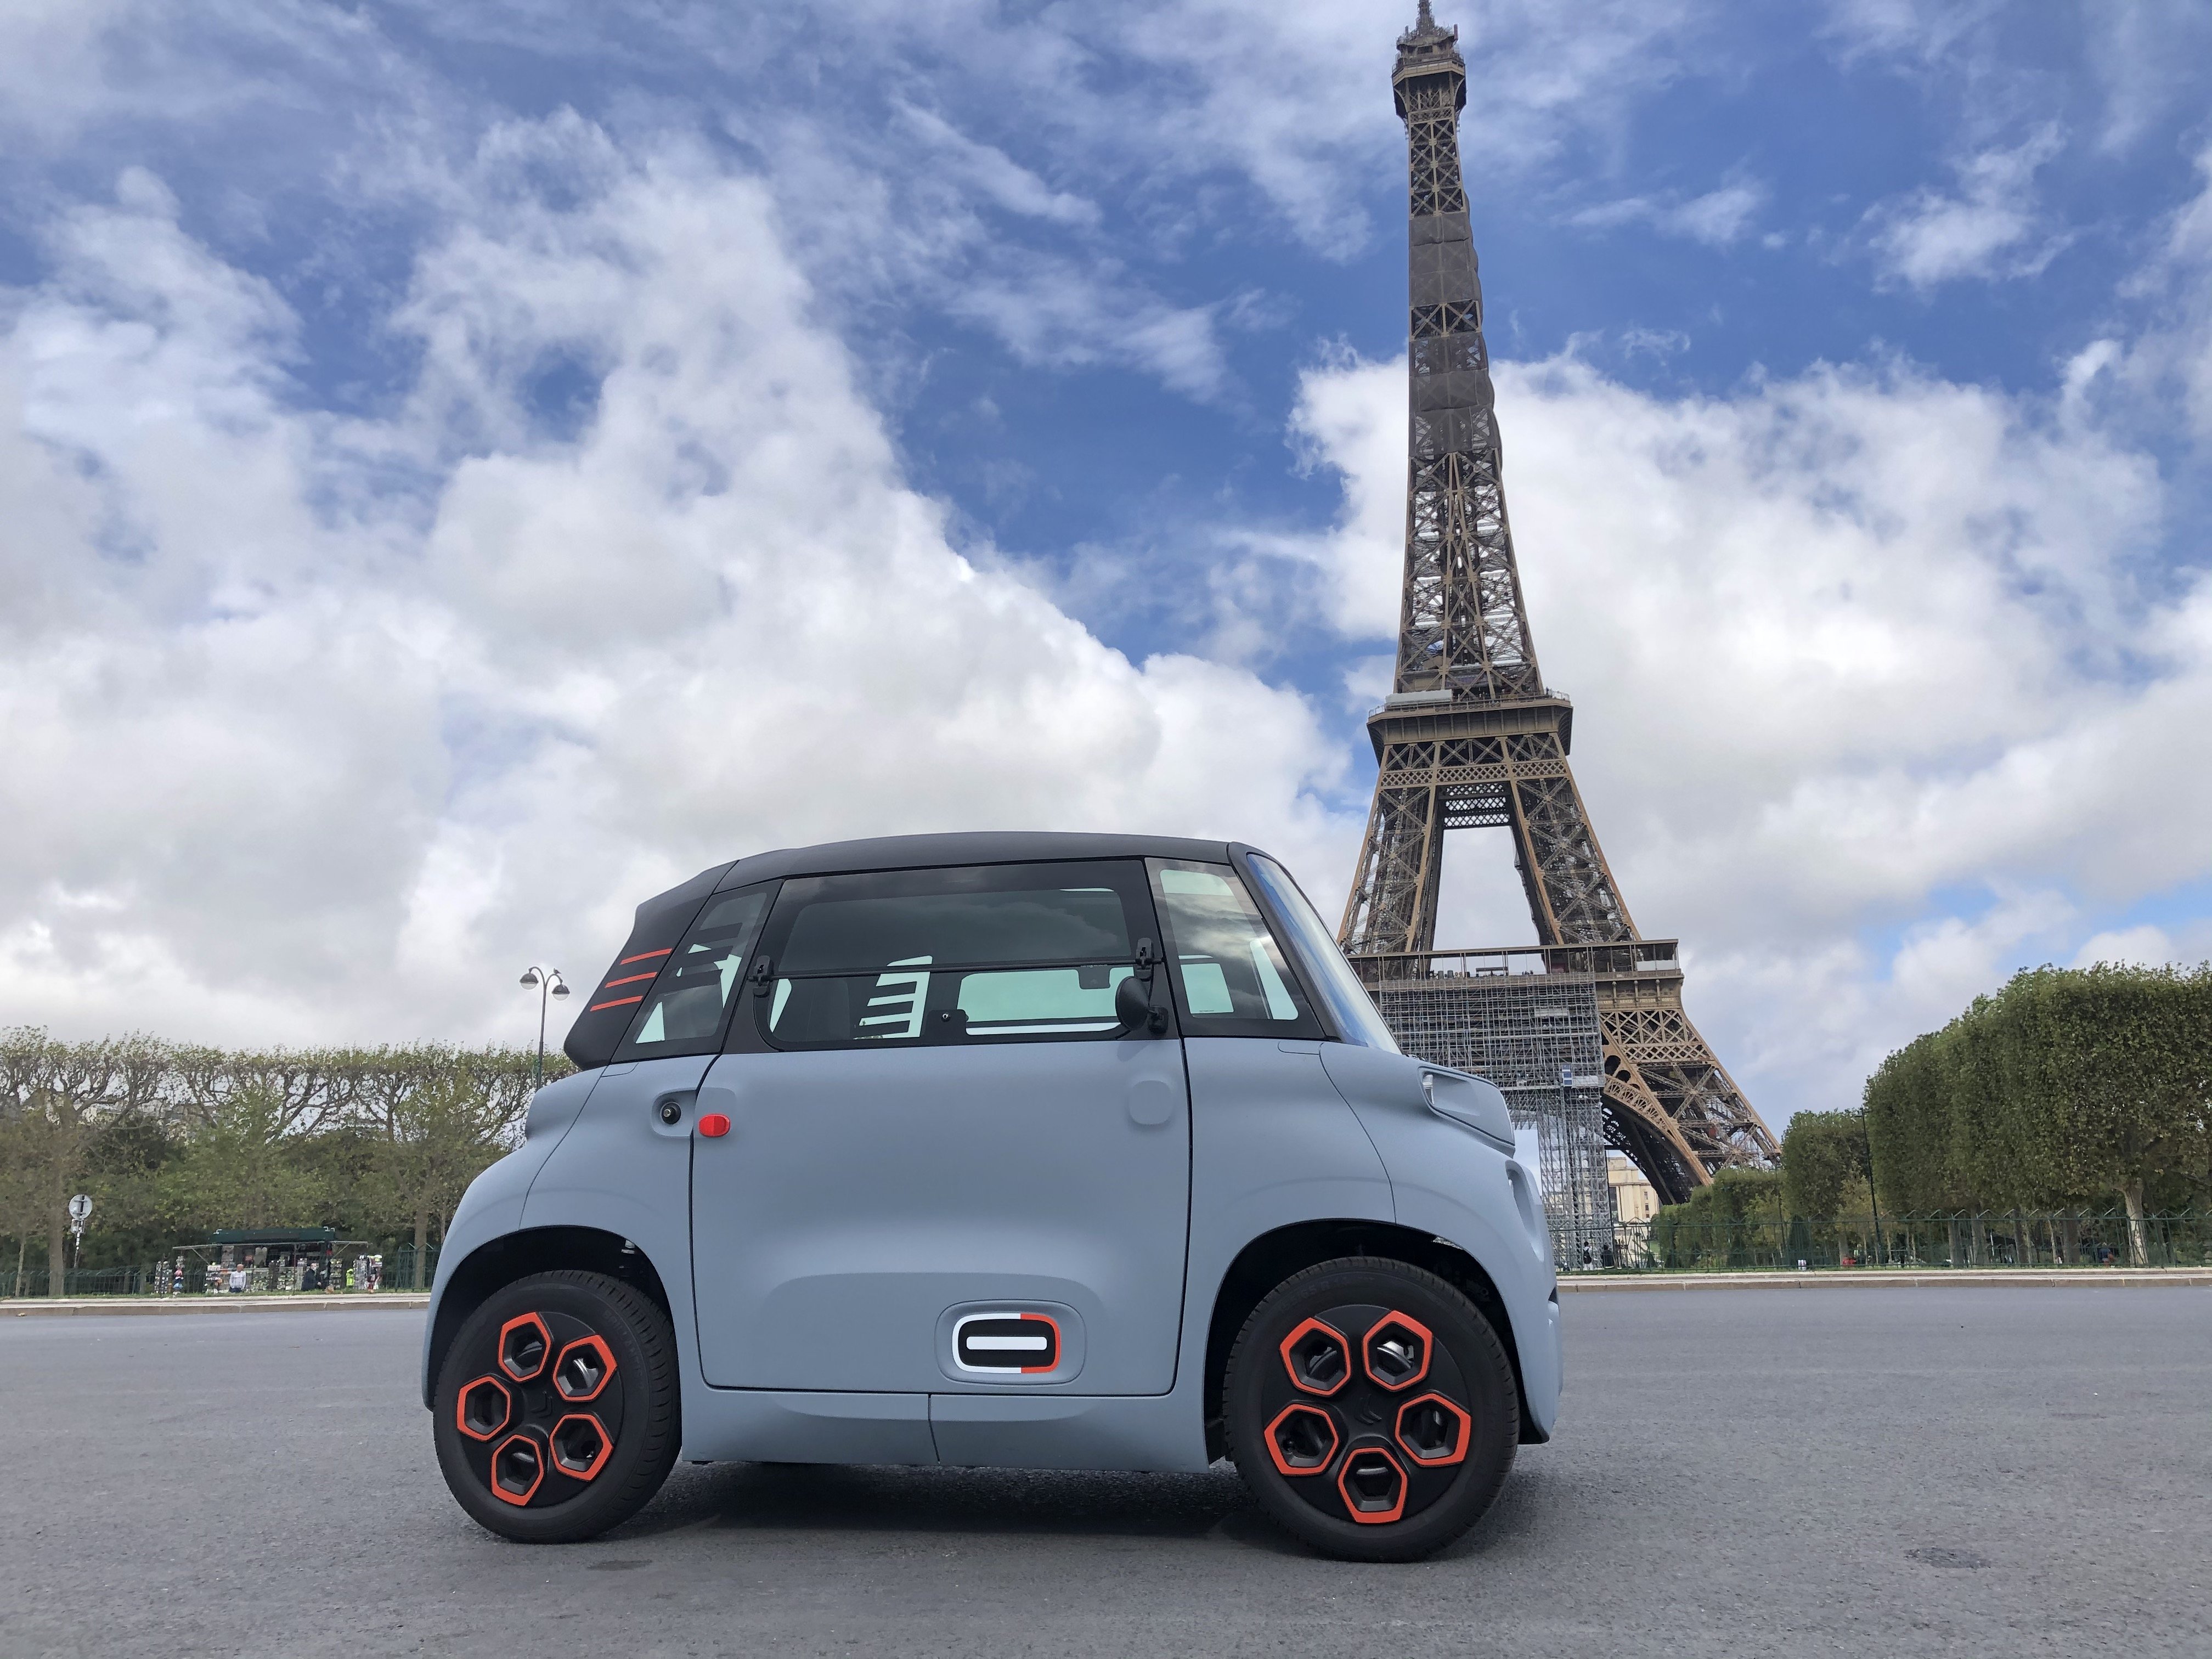 [Test] Citroën Ami 100 ëlectric an electric car between two worlds